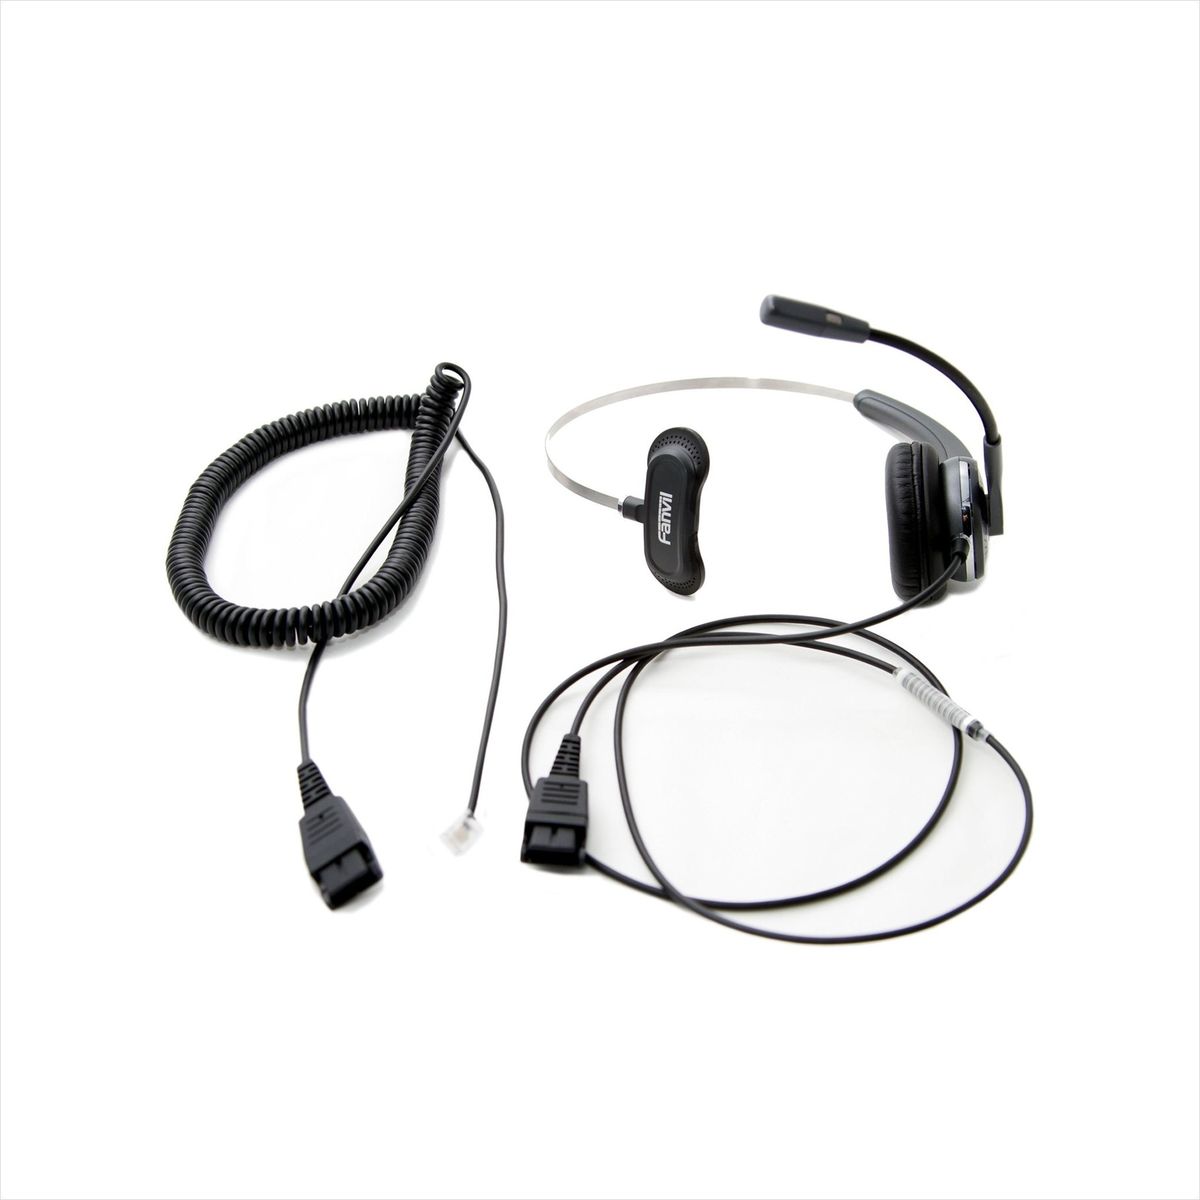 FANVIL - Headset With Microphone | Shop Today. Get it Tomorrow ...